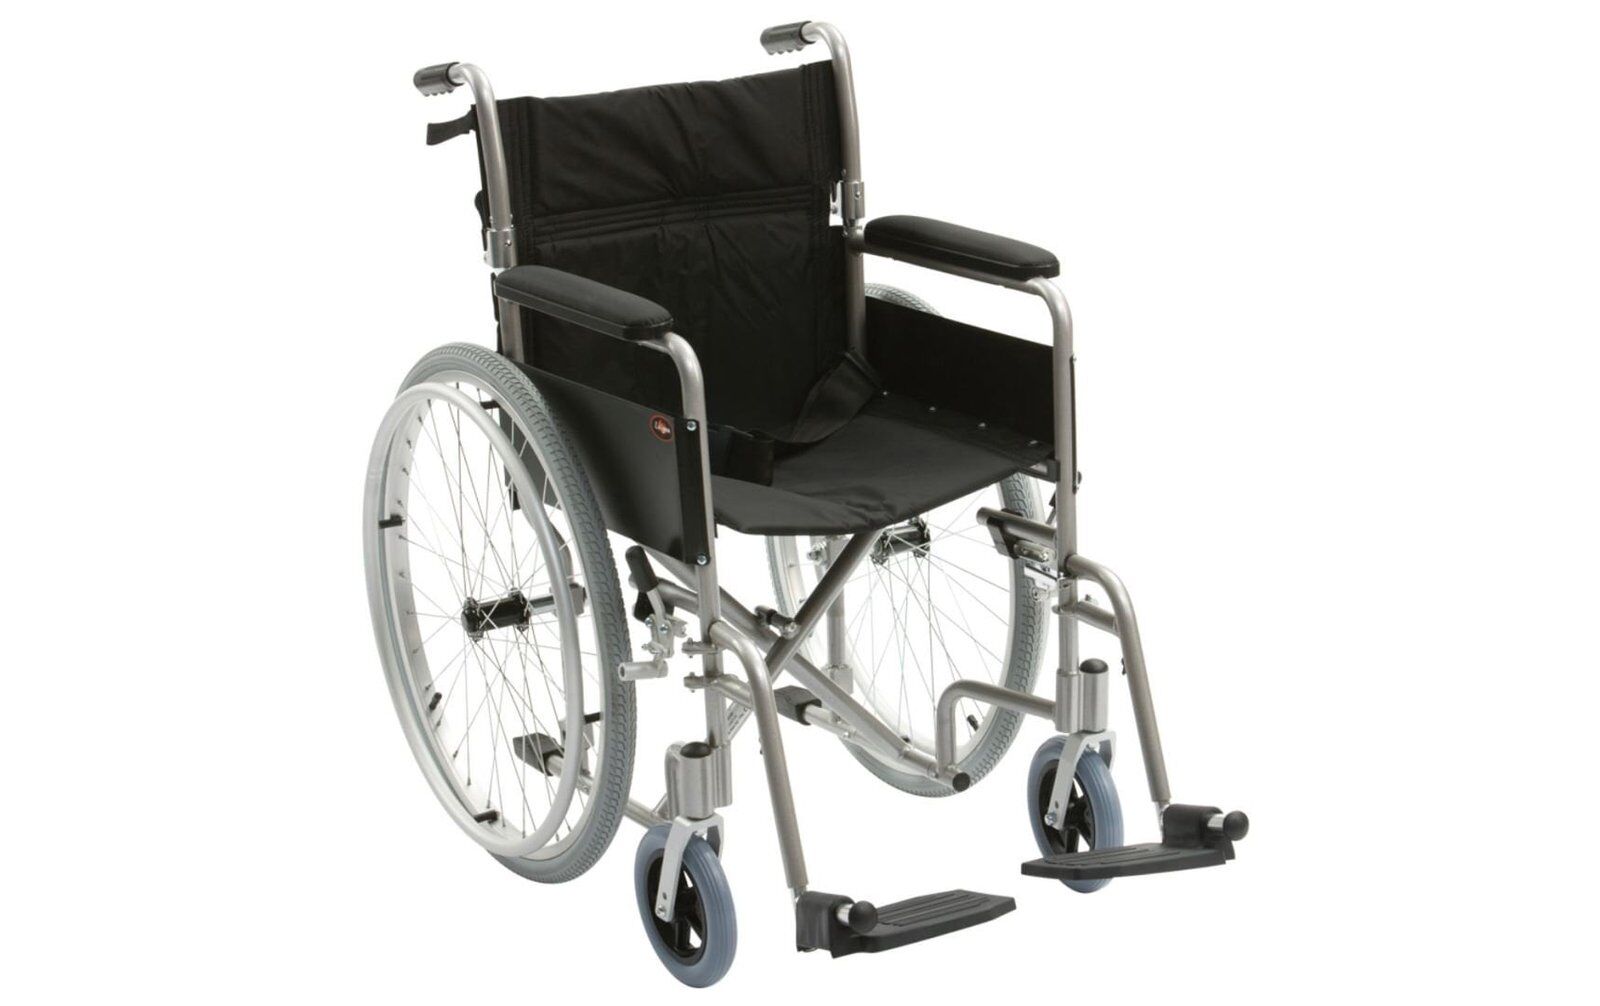 Sight Pakistan offers best Wheel Chair Aluminium with Flip up Legrest, Half-Folding Back Rest and autolock united breaks Price in Pakistan. Buy aluminium wheelchair from Sight Pakistan at an affordable price today!